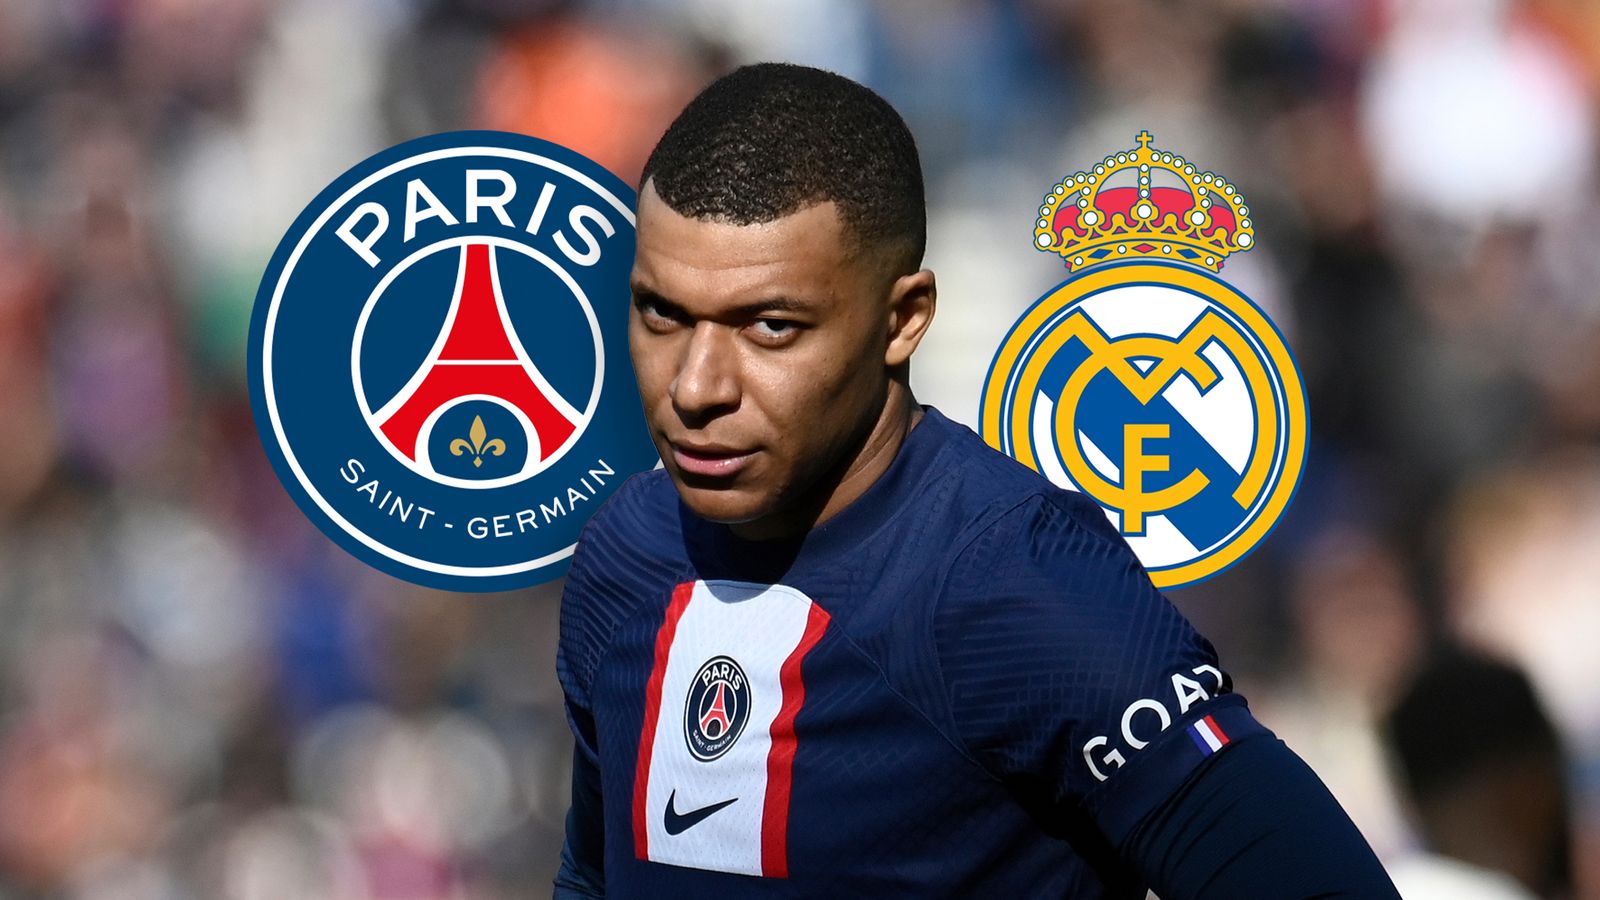 Kylian Mbappe put up for sale and dropped from Paris Saint-Germain tour amid contract standoff | Football News